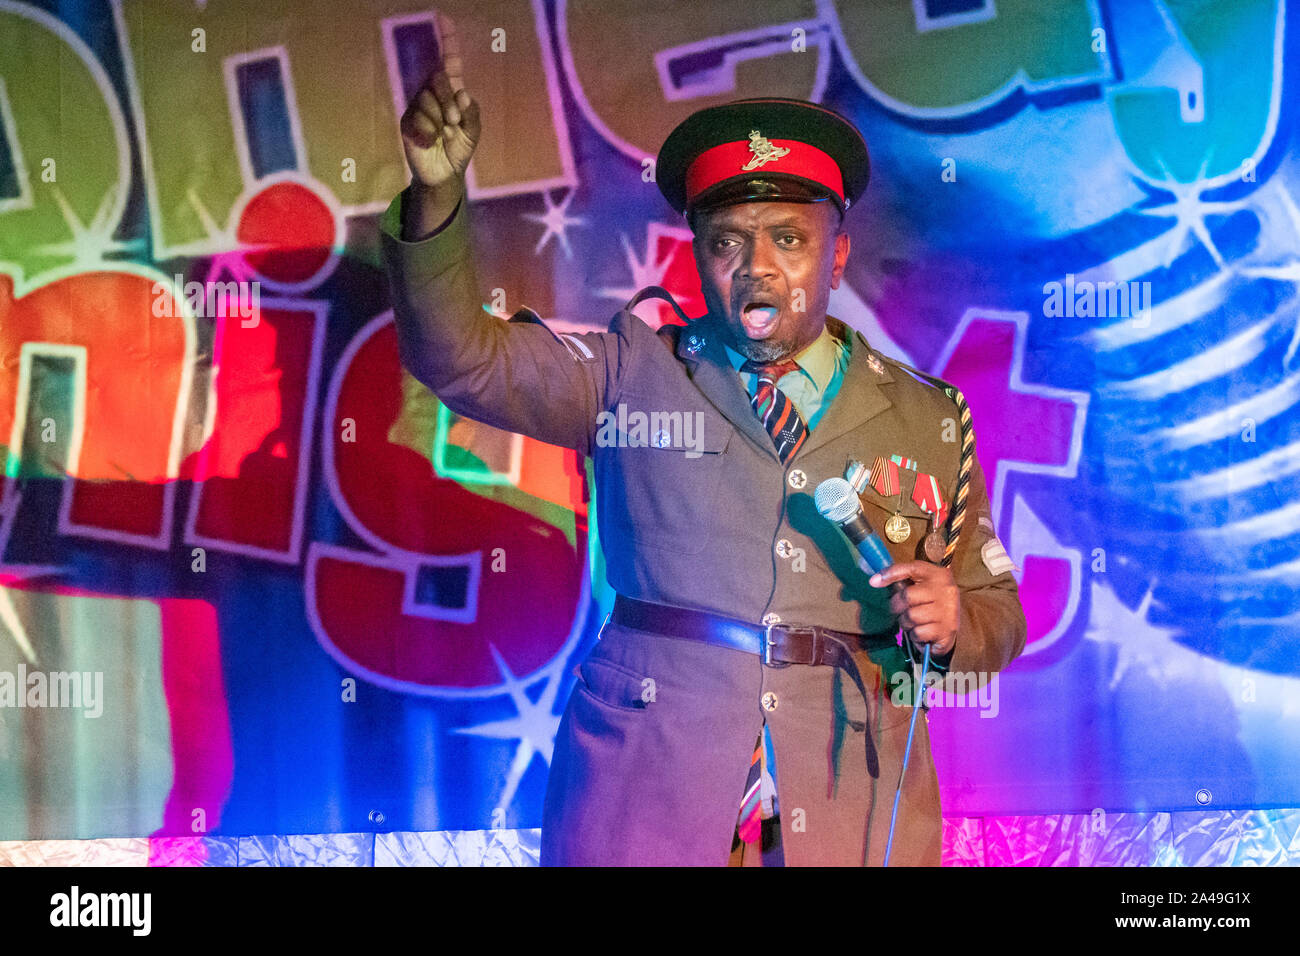 Henlow, Bedfordshire, UK. 9th October 2019. African dictator, President Obonjo of the Lafta Republic, was in Henlow as part of his #justiceforobonjo campaign after E4 aired a show which he claims is a rip off of his act and character which he has been performing for many years on the comedy circuit. Comedian Benjamin Bello plays the character of exiled President Obonjo and is just back from a successful stint at the Edinburgh Fringe festival. Stock Photo